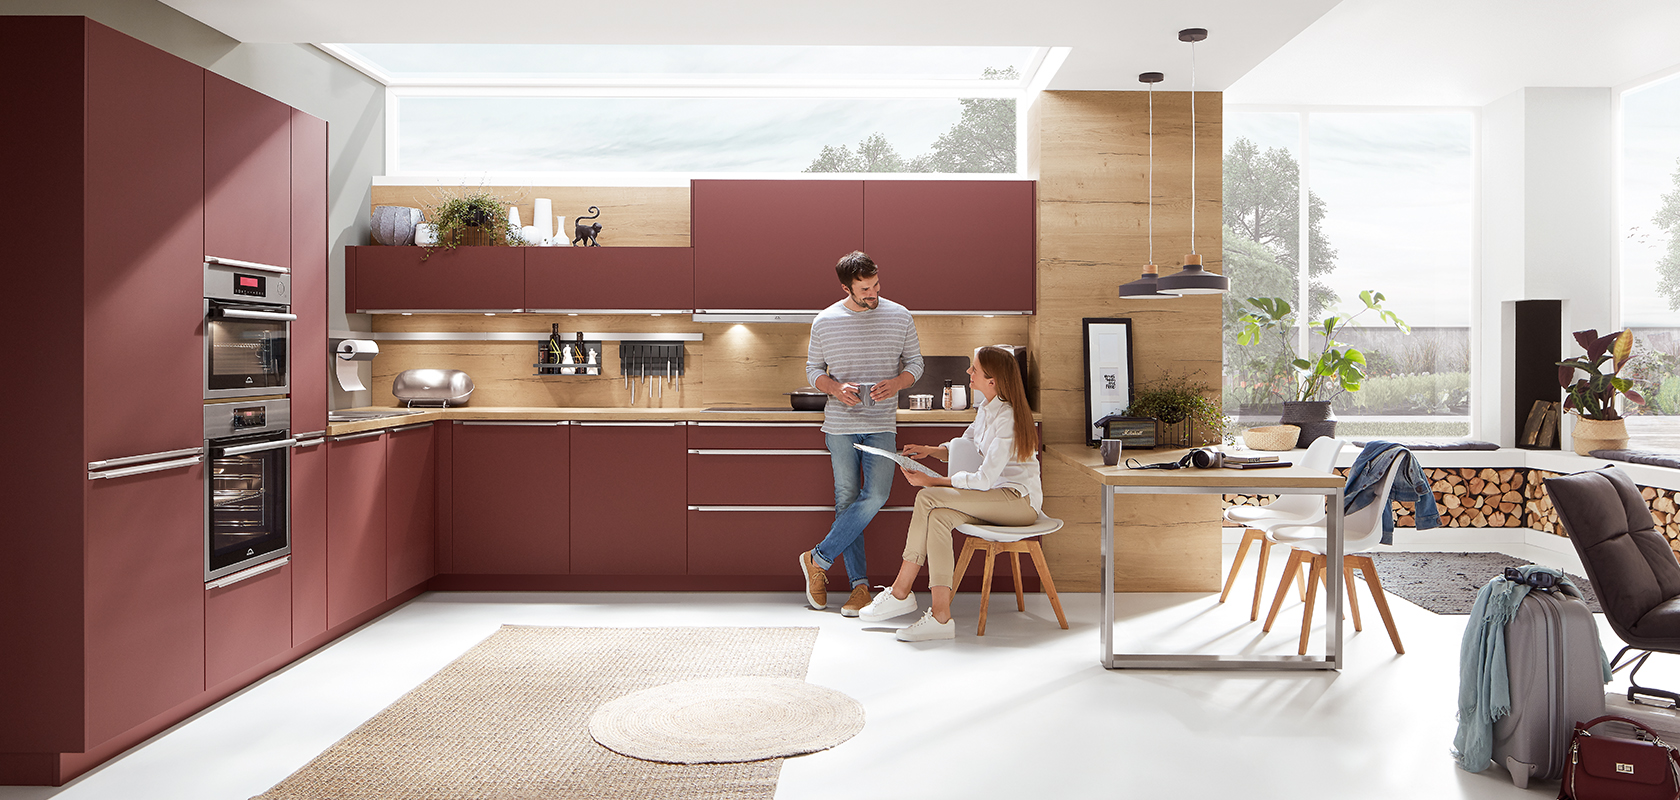 Modern kitchen with sleek maroon cabinets, stainless steel appliances, and wood accents, featuring a couple in casual attire having a pleasant conversation.